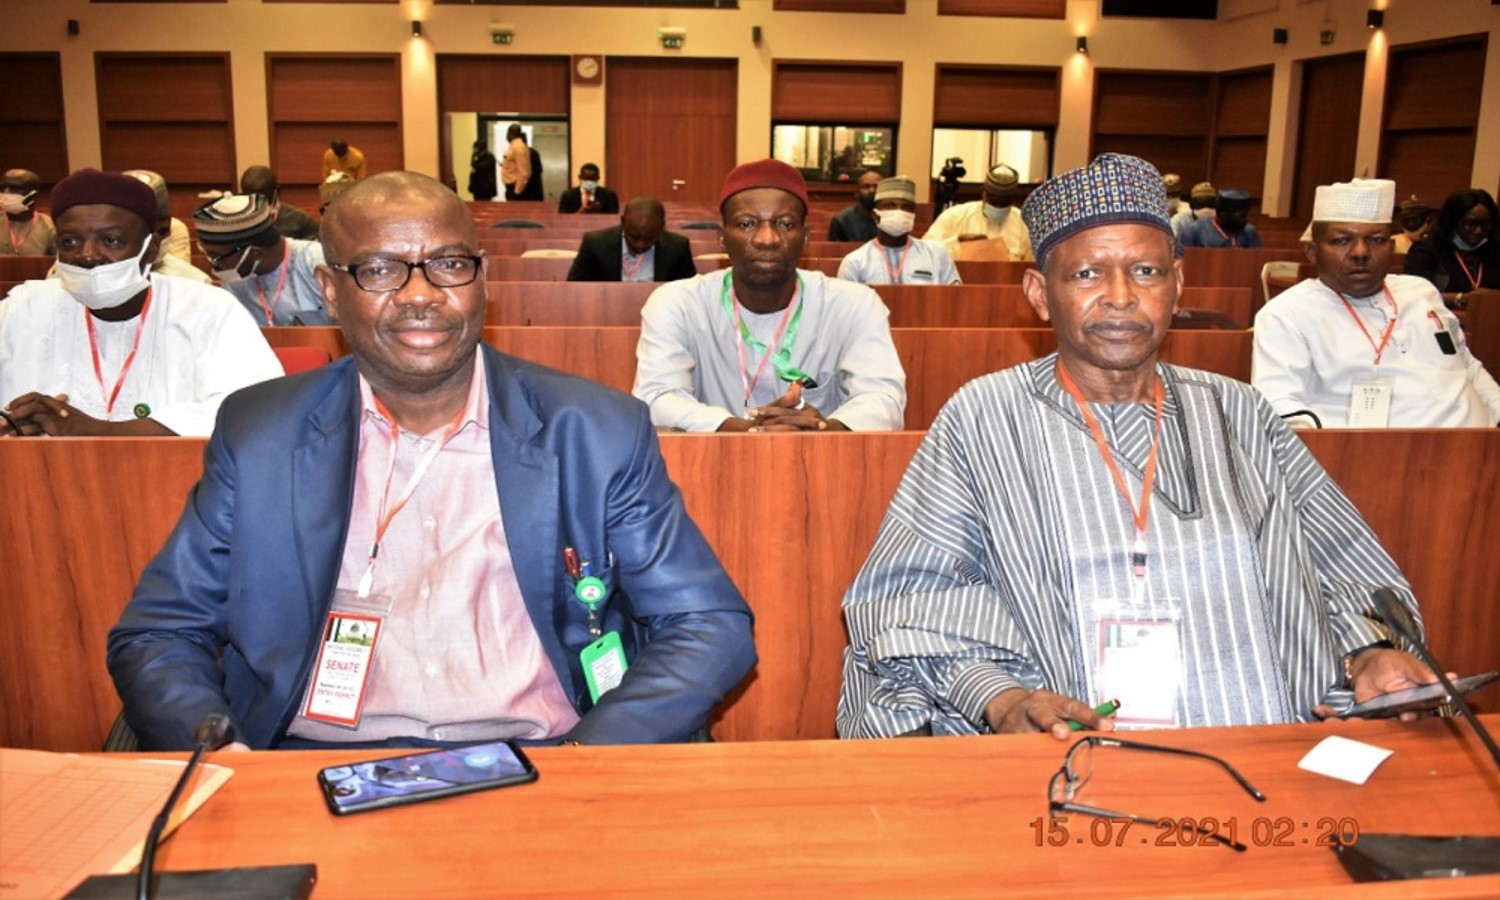 Executive Secretary at the National Assembly for public hearing on FCEs' Act